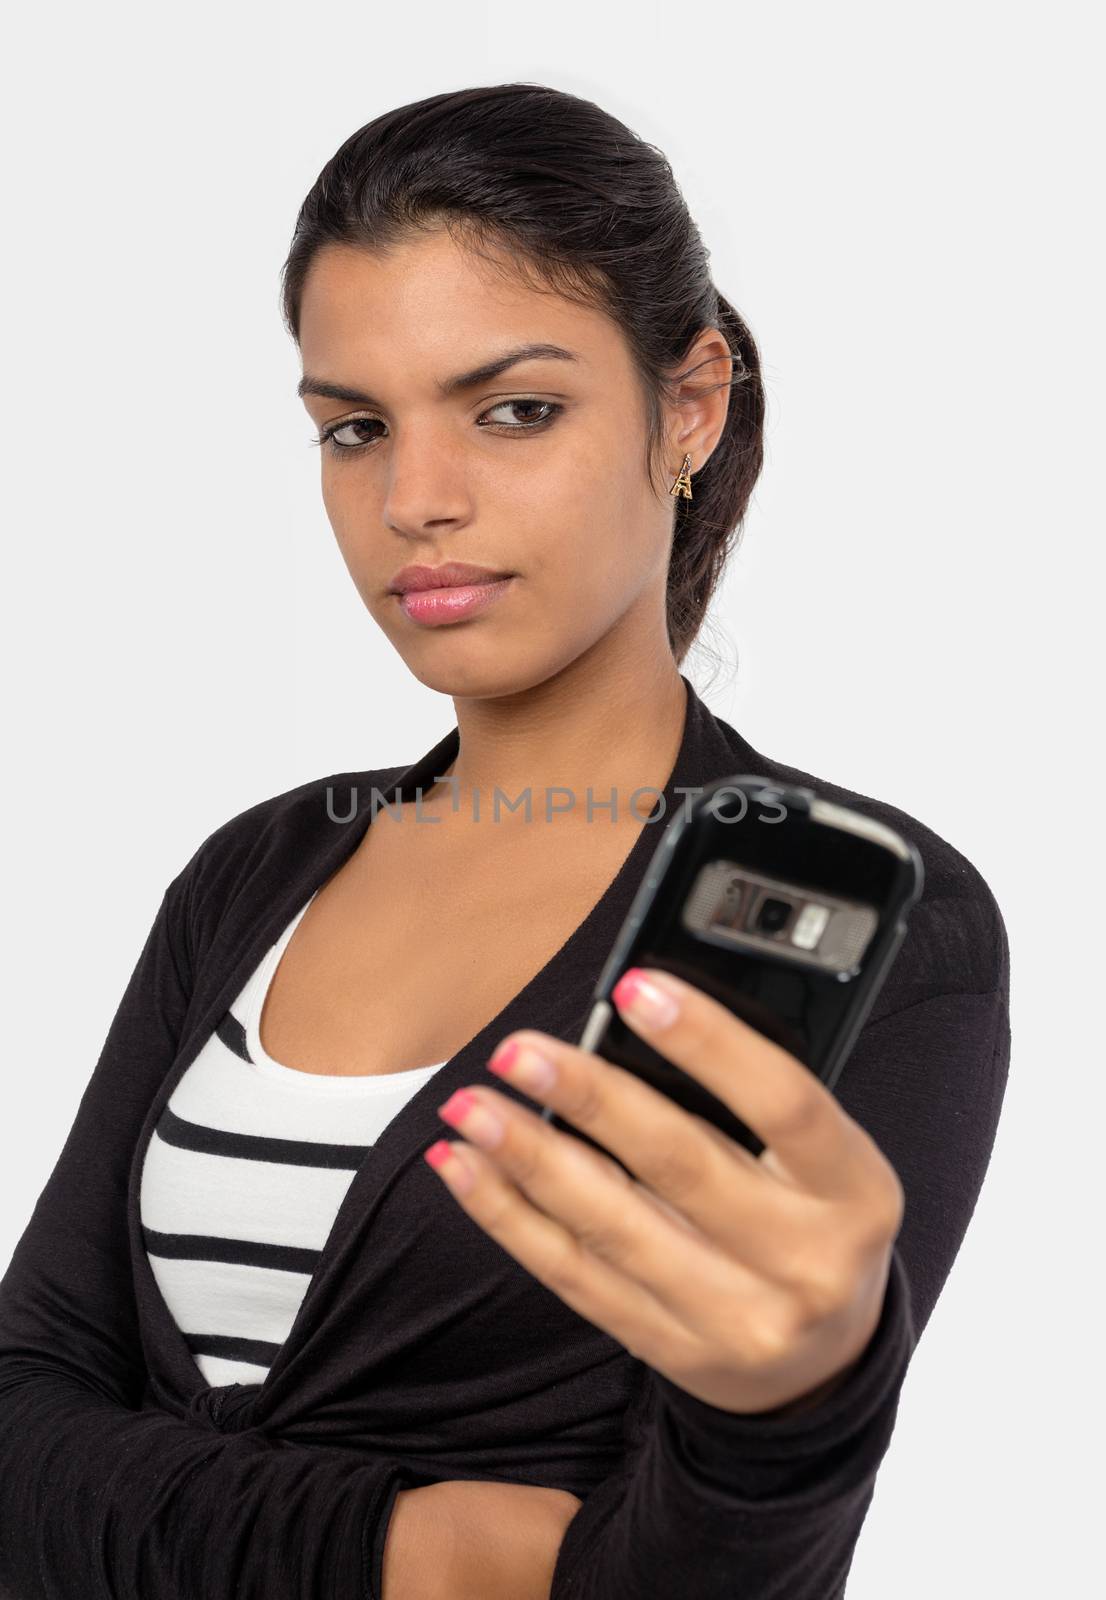 A girl with black hair looking to and holding a cellphone with her hand